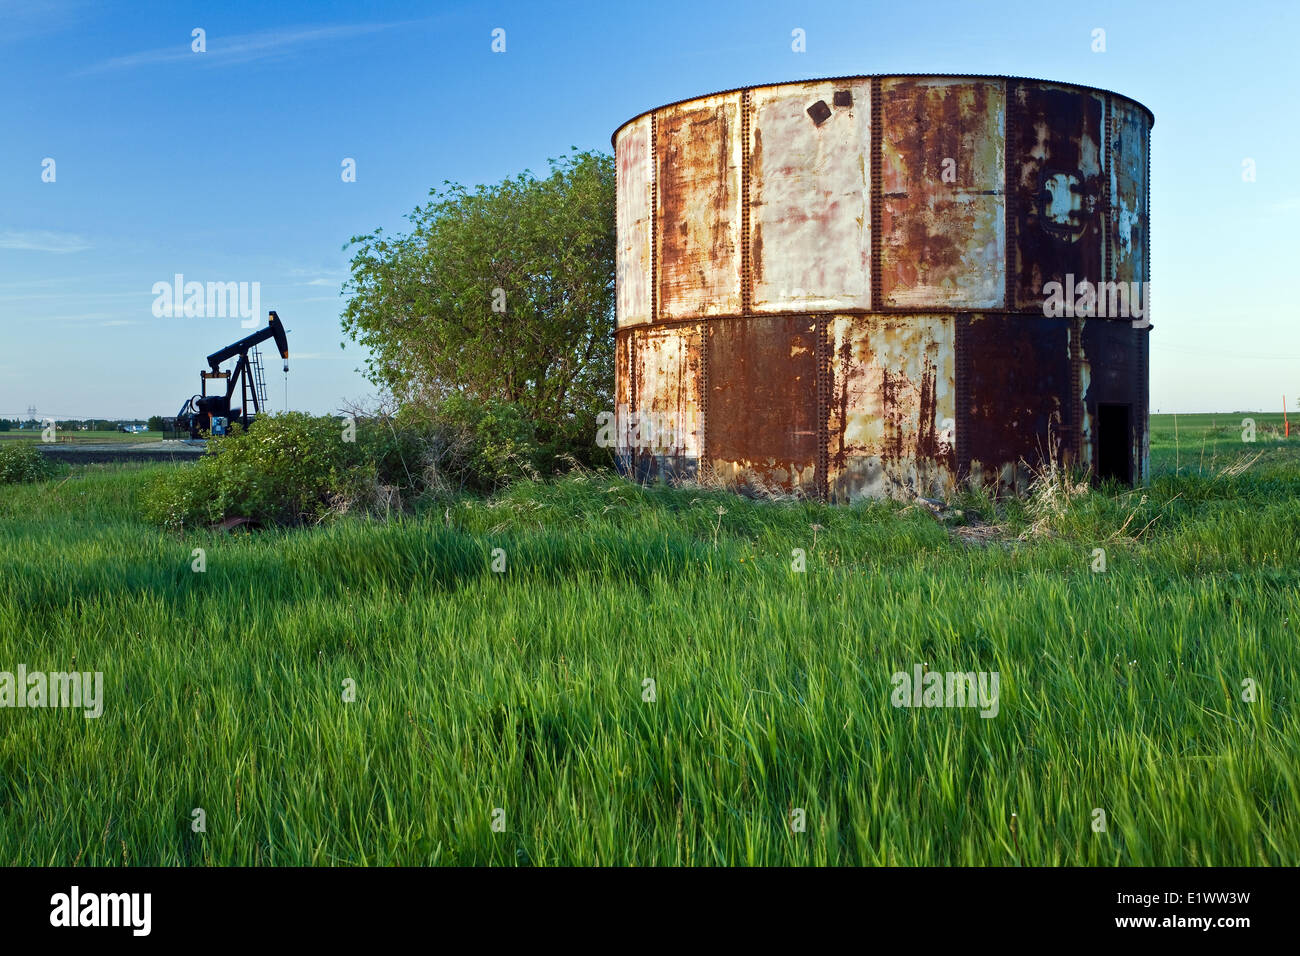 Abandoned oil storage container and working pumpjack, Alberta, Canada. Stock Photo